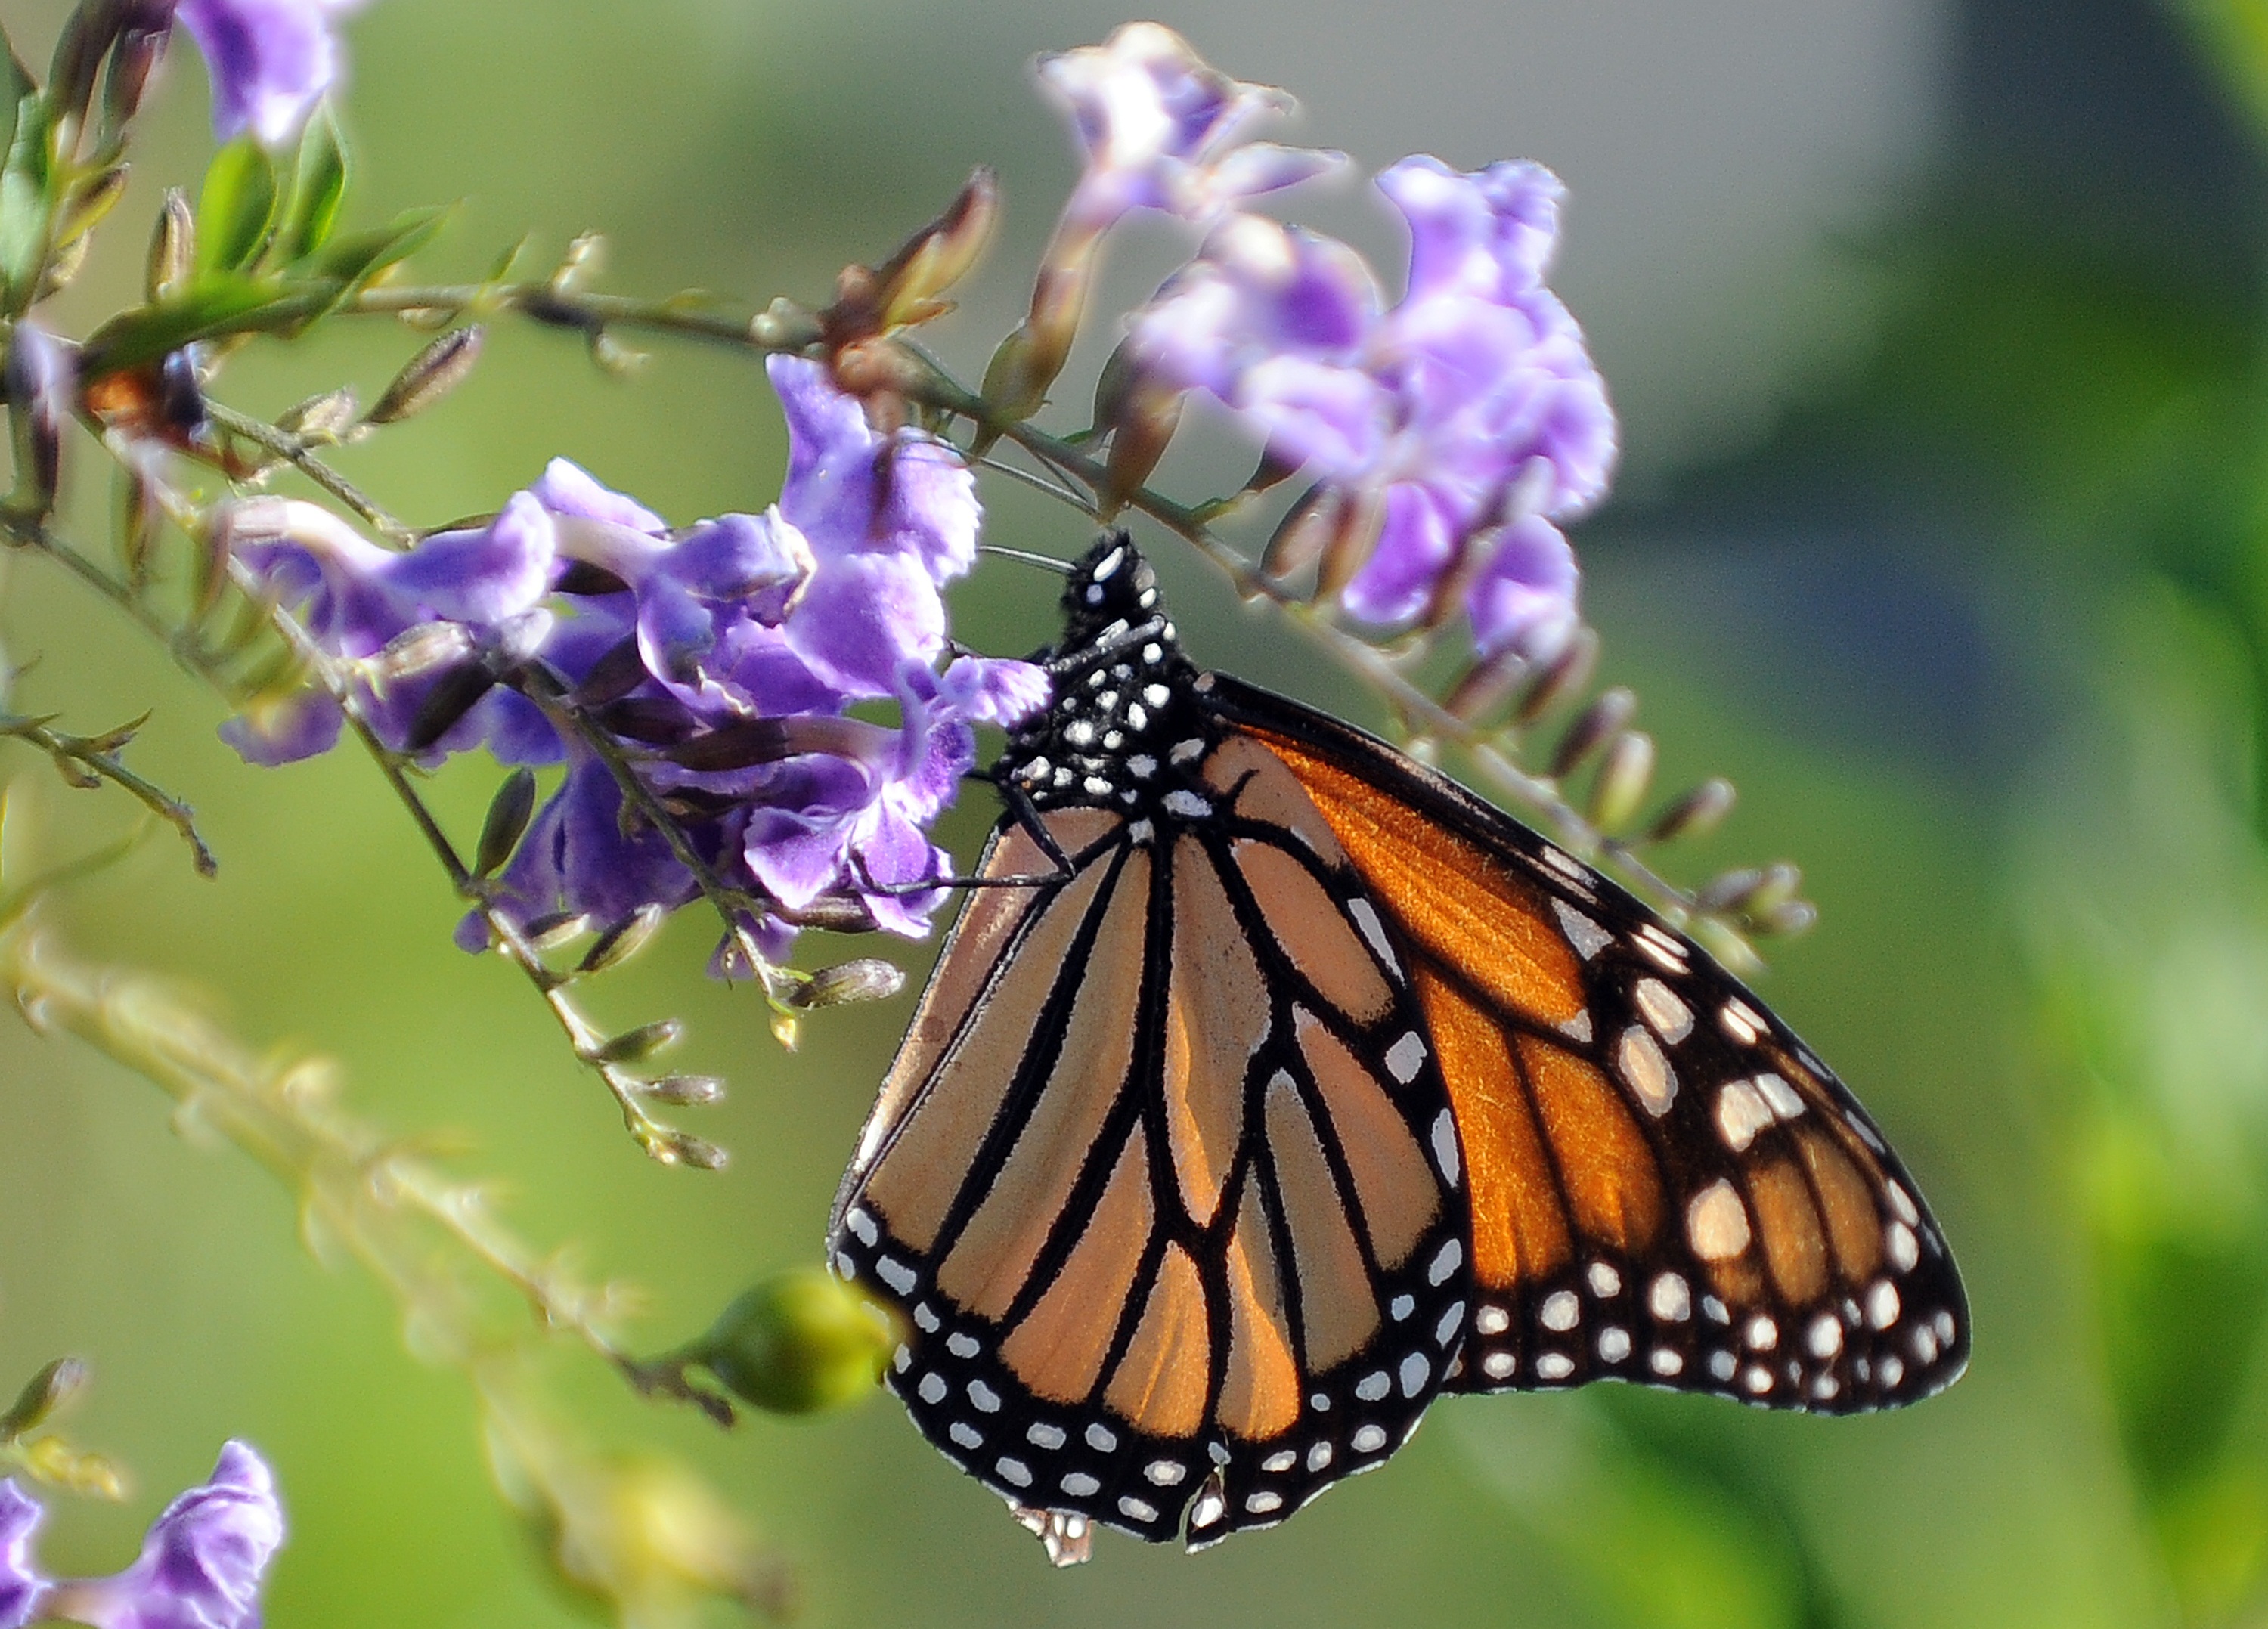 A Monarch butterfly is in a flower in Los Angeles, Calif. on Oct. 28, 2010. (Gabriel Bouys&mdash;AFP/Getty Images)